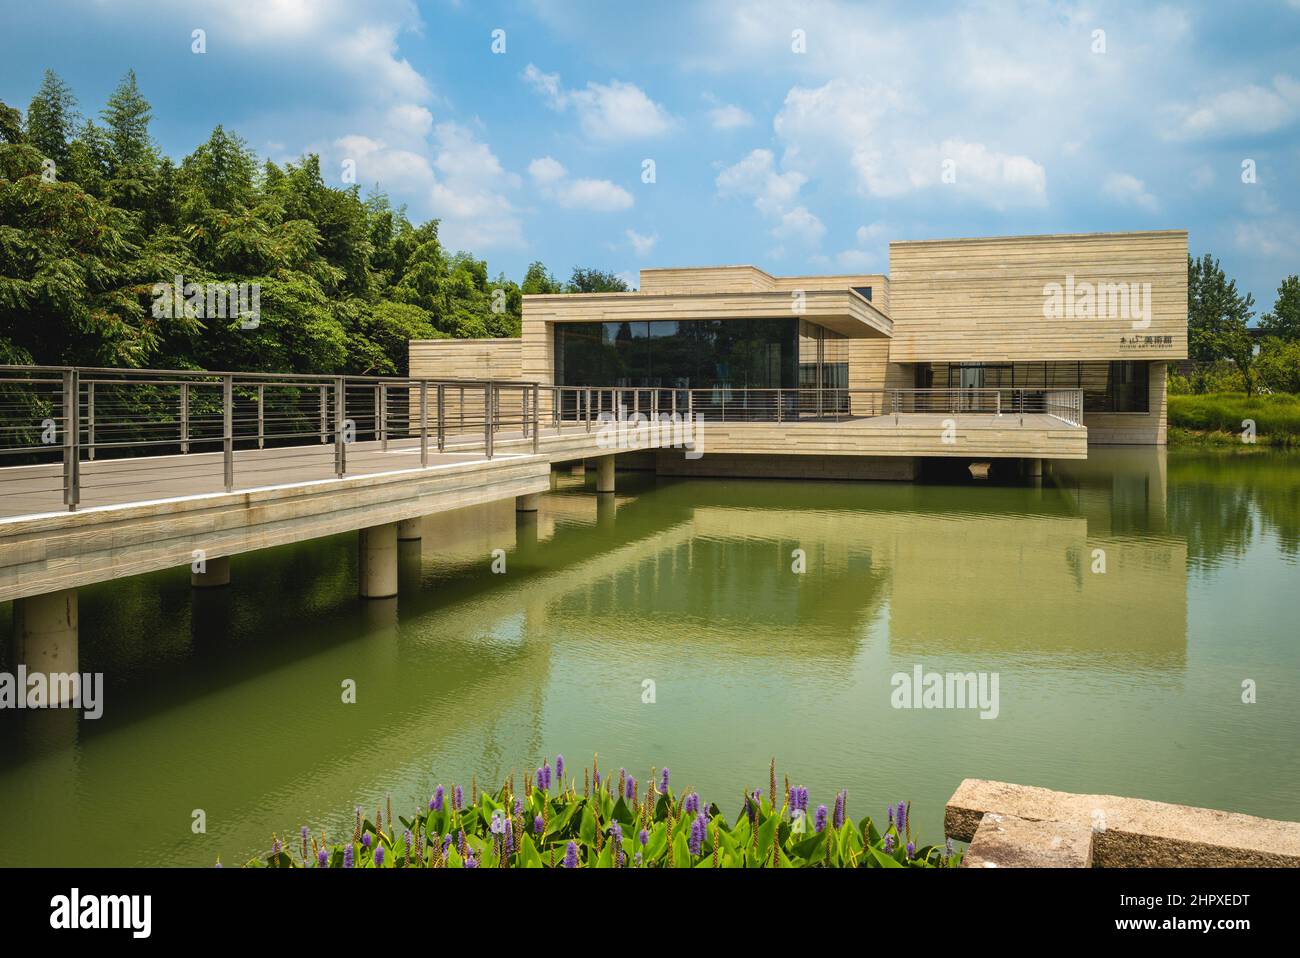 August 1, 2018: Muxin Art Museum, dedicated to celebrating and showcasing the lifelong work of the artist, writer, and poet Mu Xin, is located in the Stock Photo